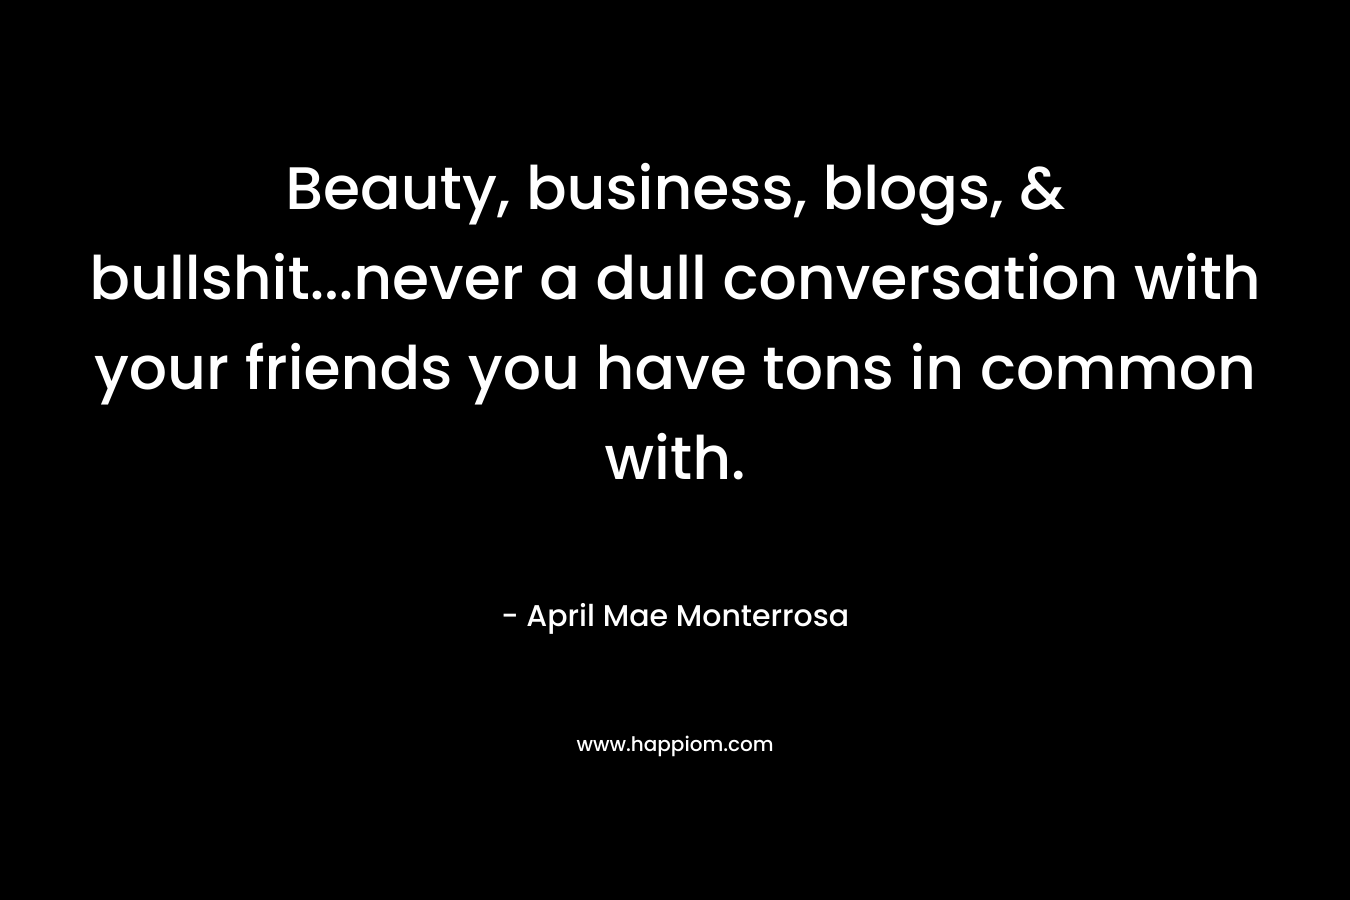 Beauty, business, blogs, & bullshit...never a dull conversation with your friends you have tons in common with.